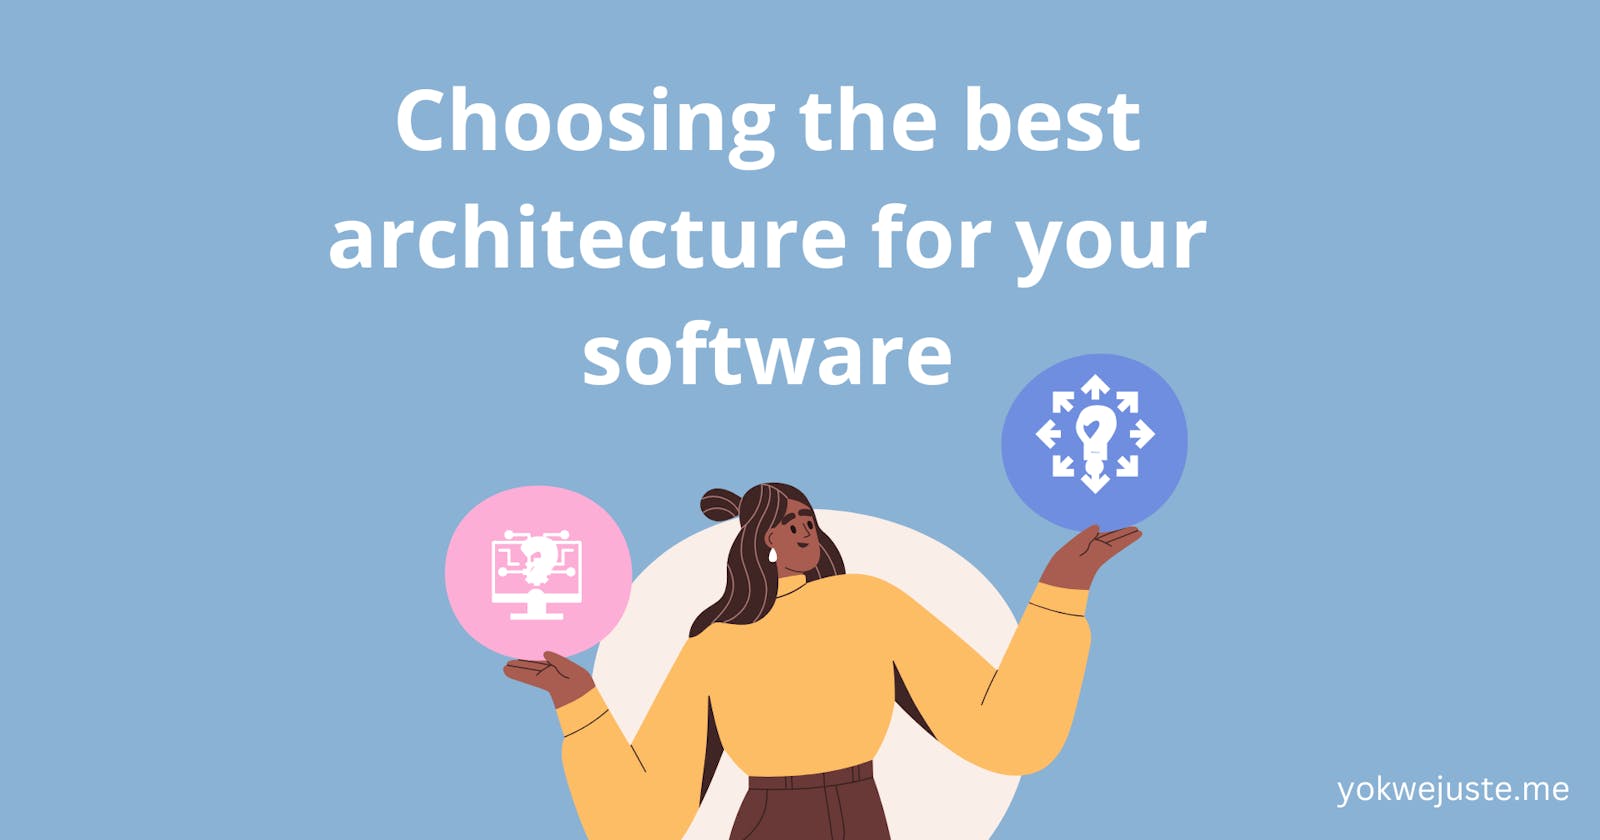 Choosing the best architecture for your software